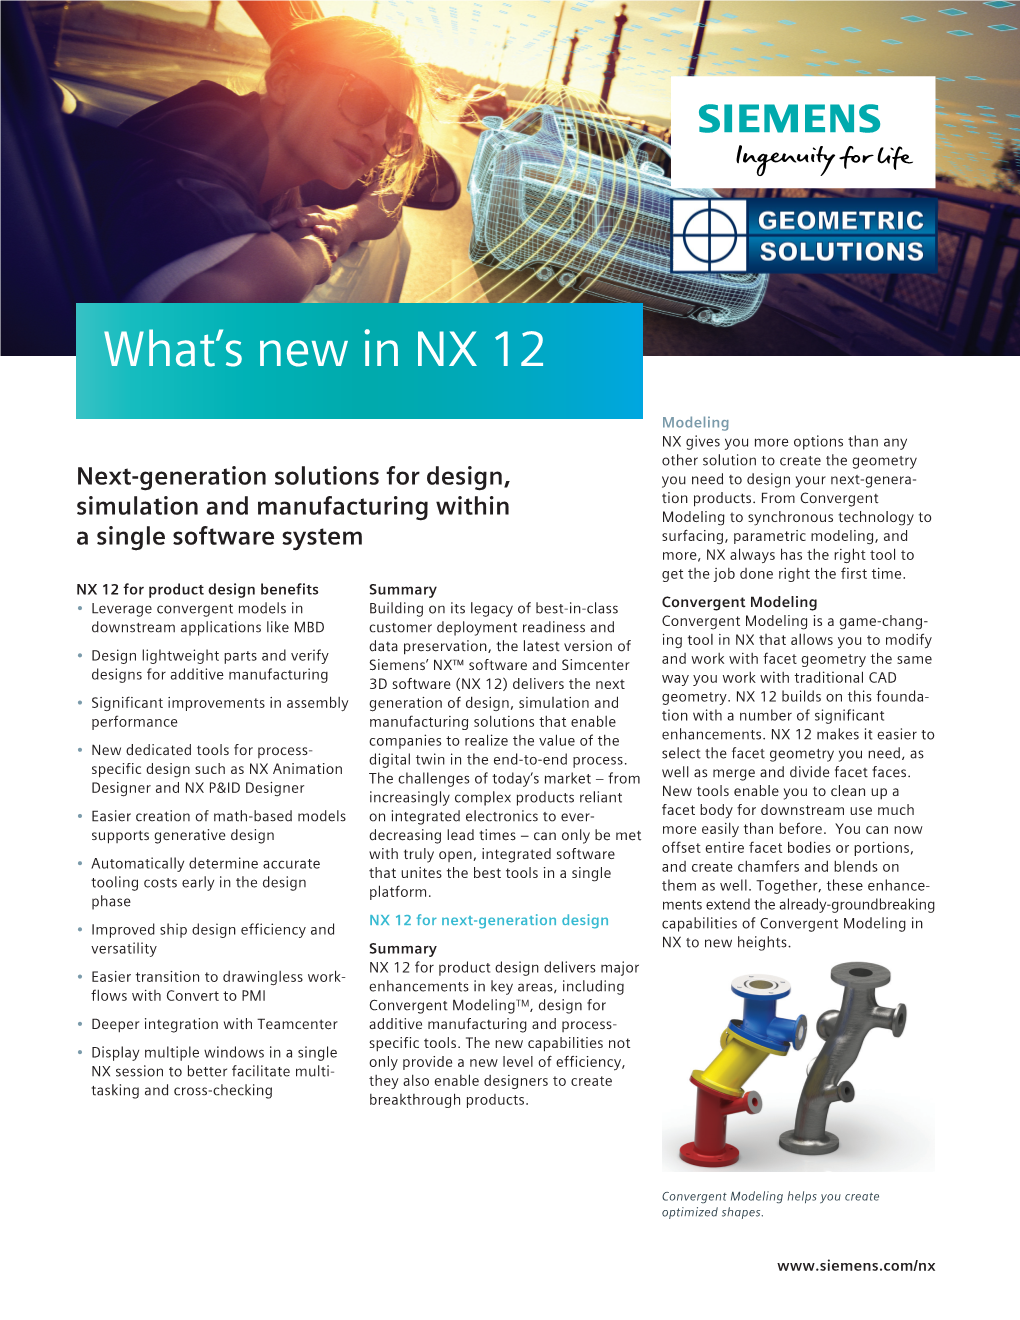 What's New in NX 12